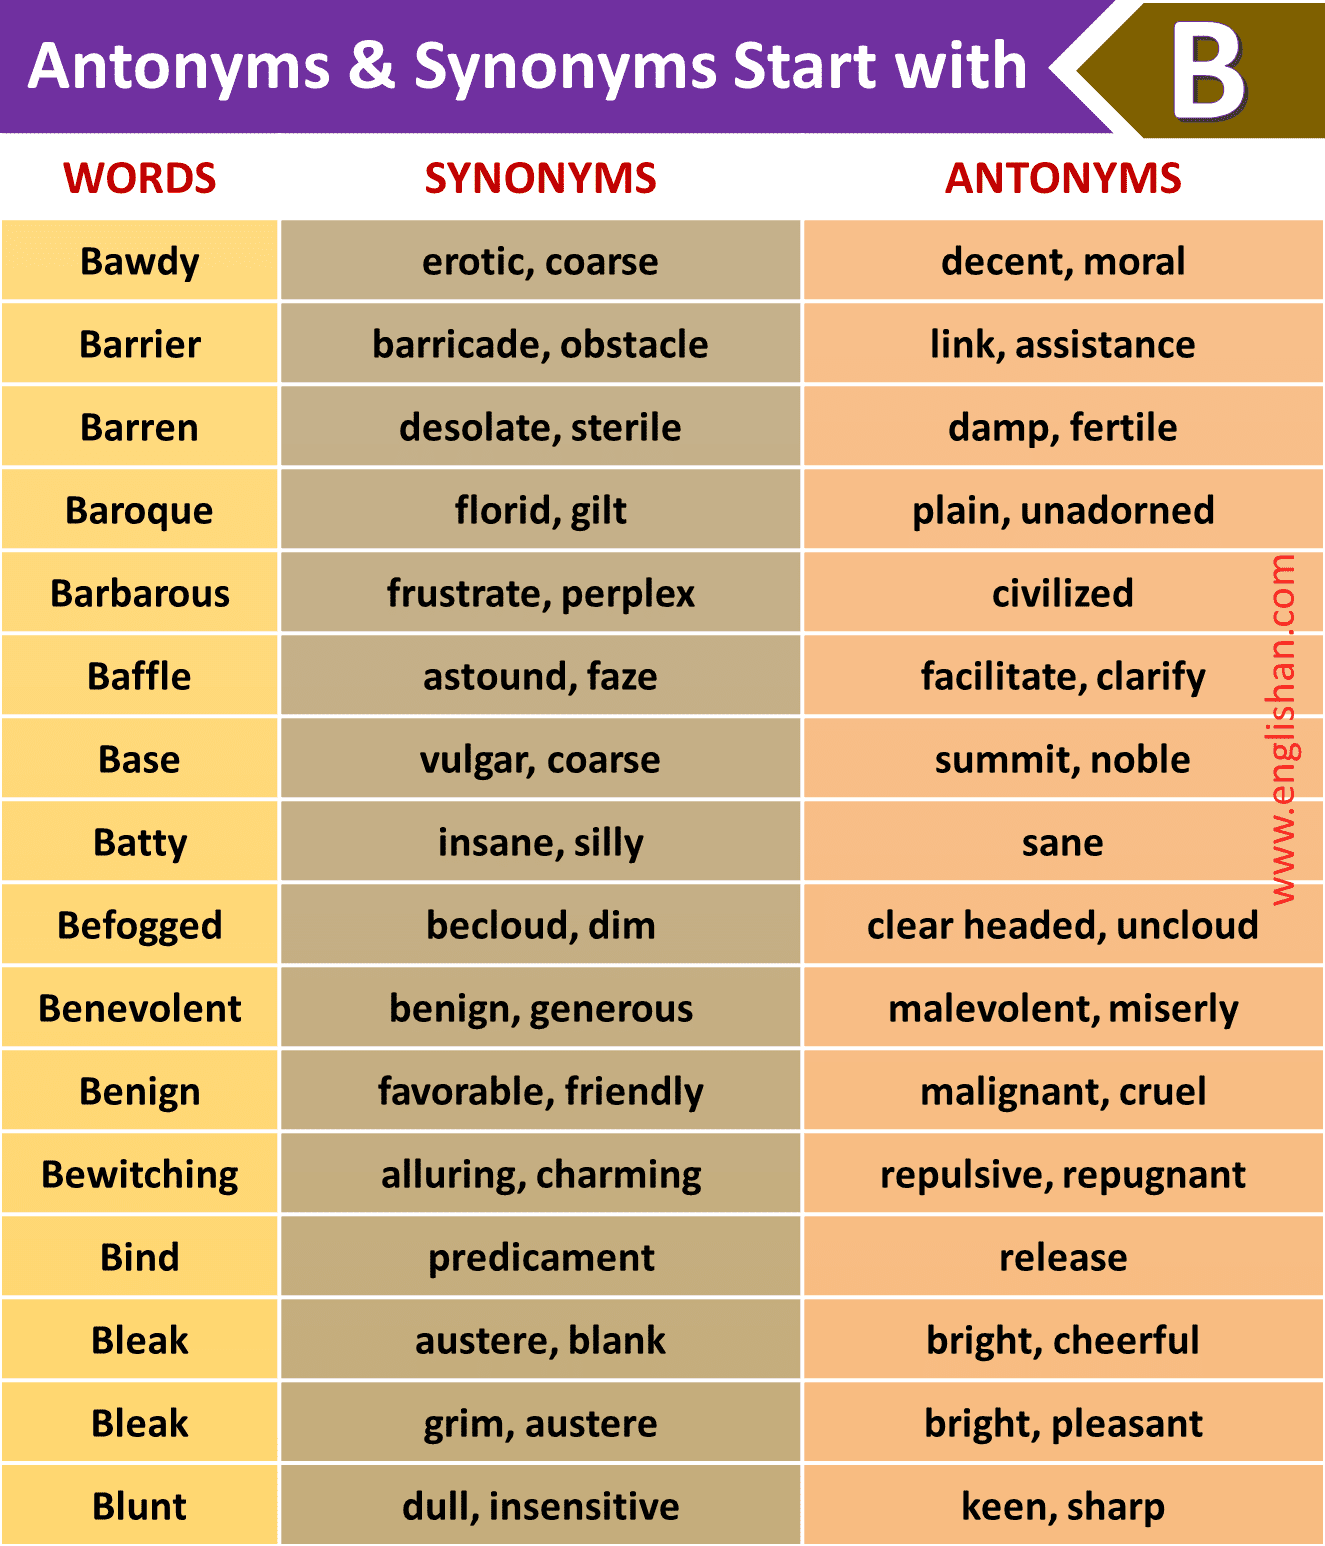 111 Synonyms & Antonyms For Innocent